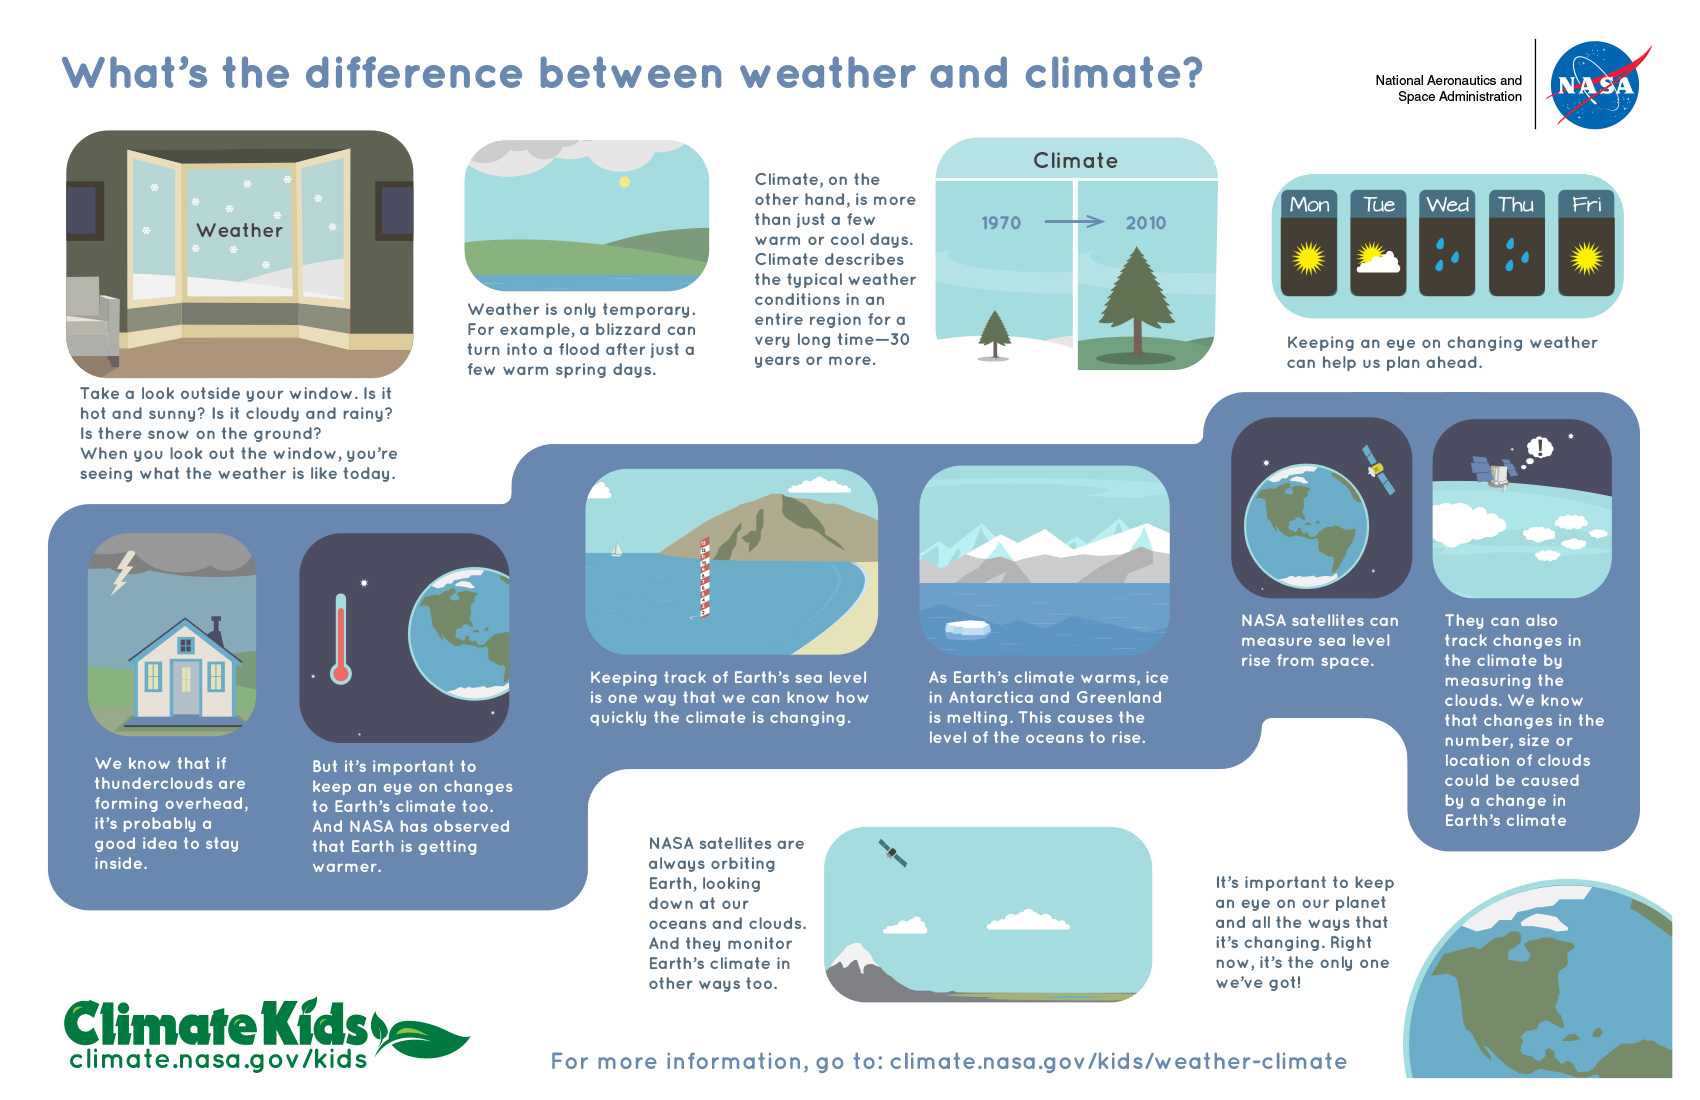 What's the Difference Between Weather and Climate? NASA Climate Kids